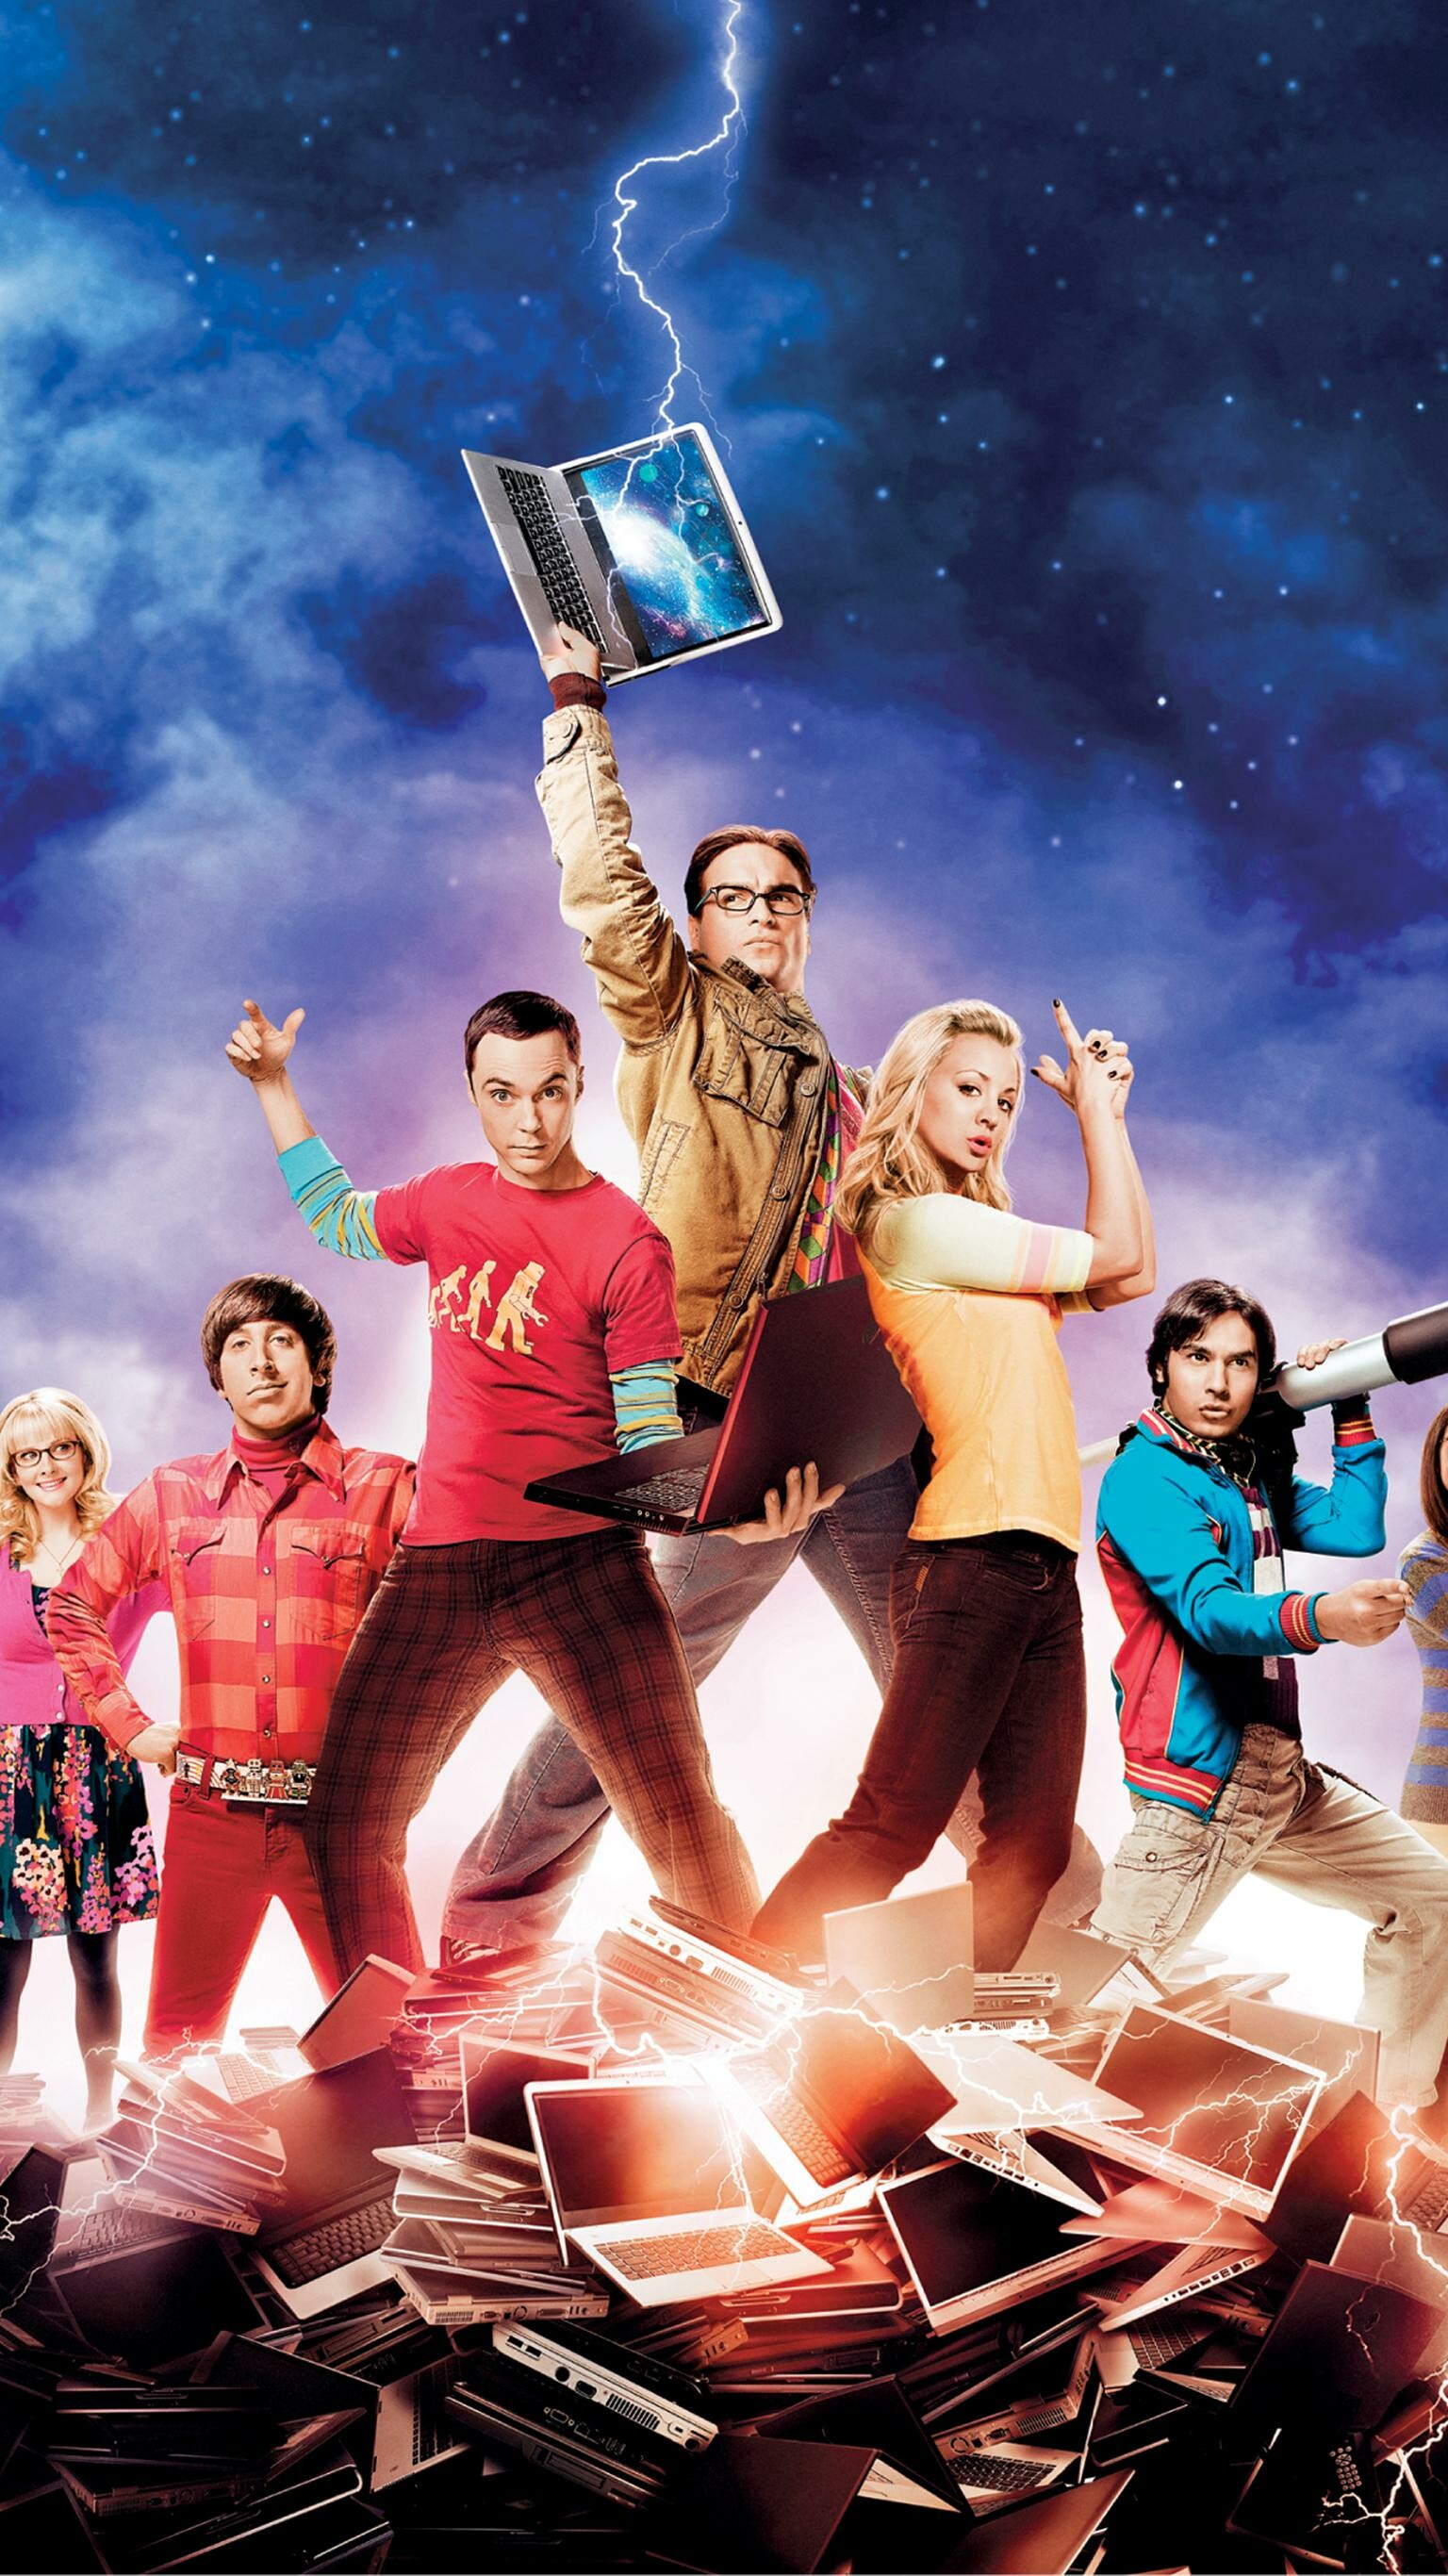 The Big Bang Theory: Seven Emmy Awards from 46 nominations. 1540x2740 HD Background.